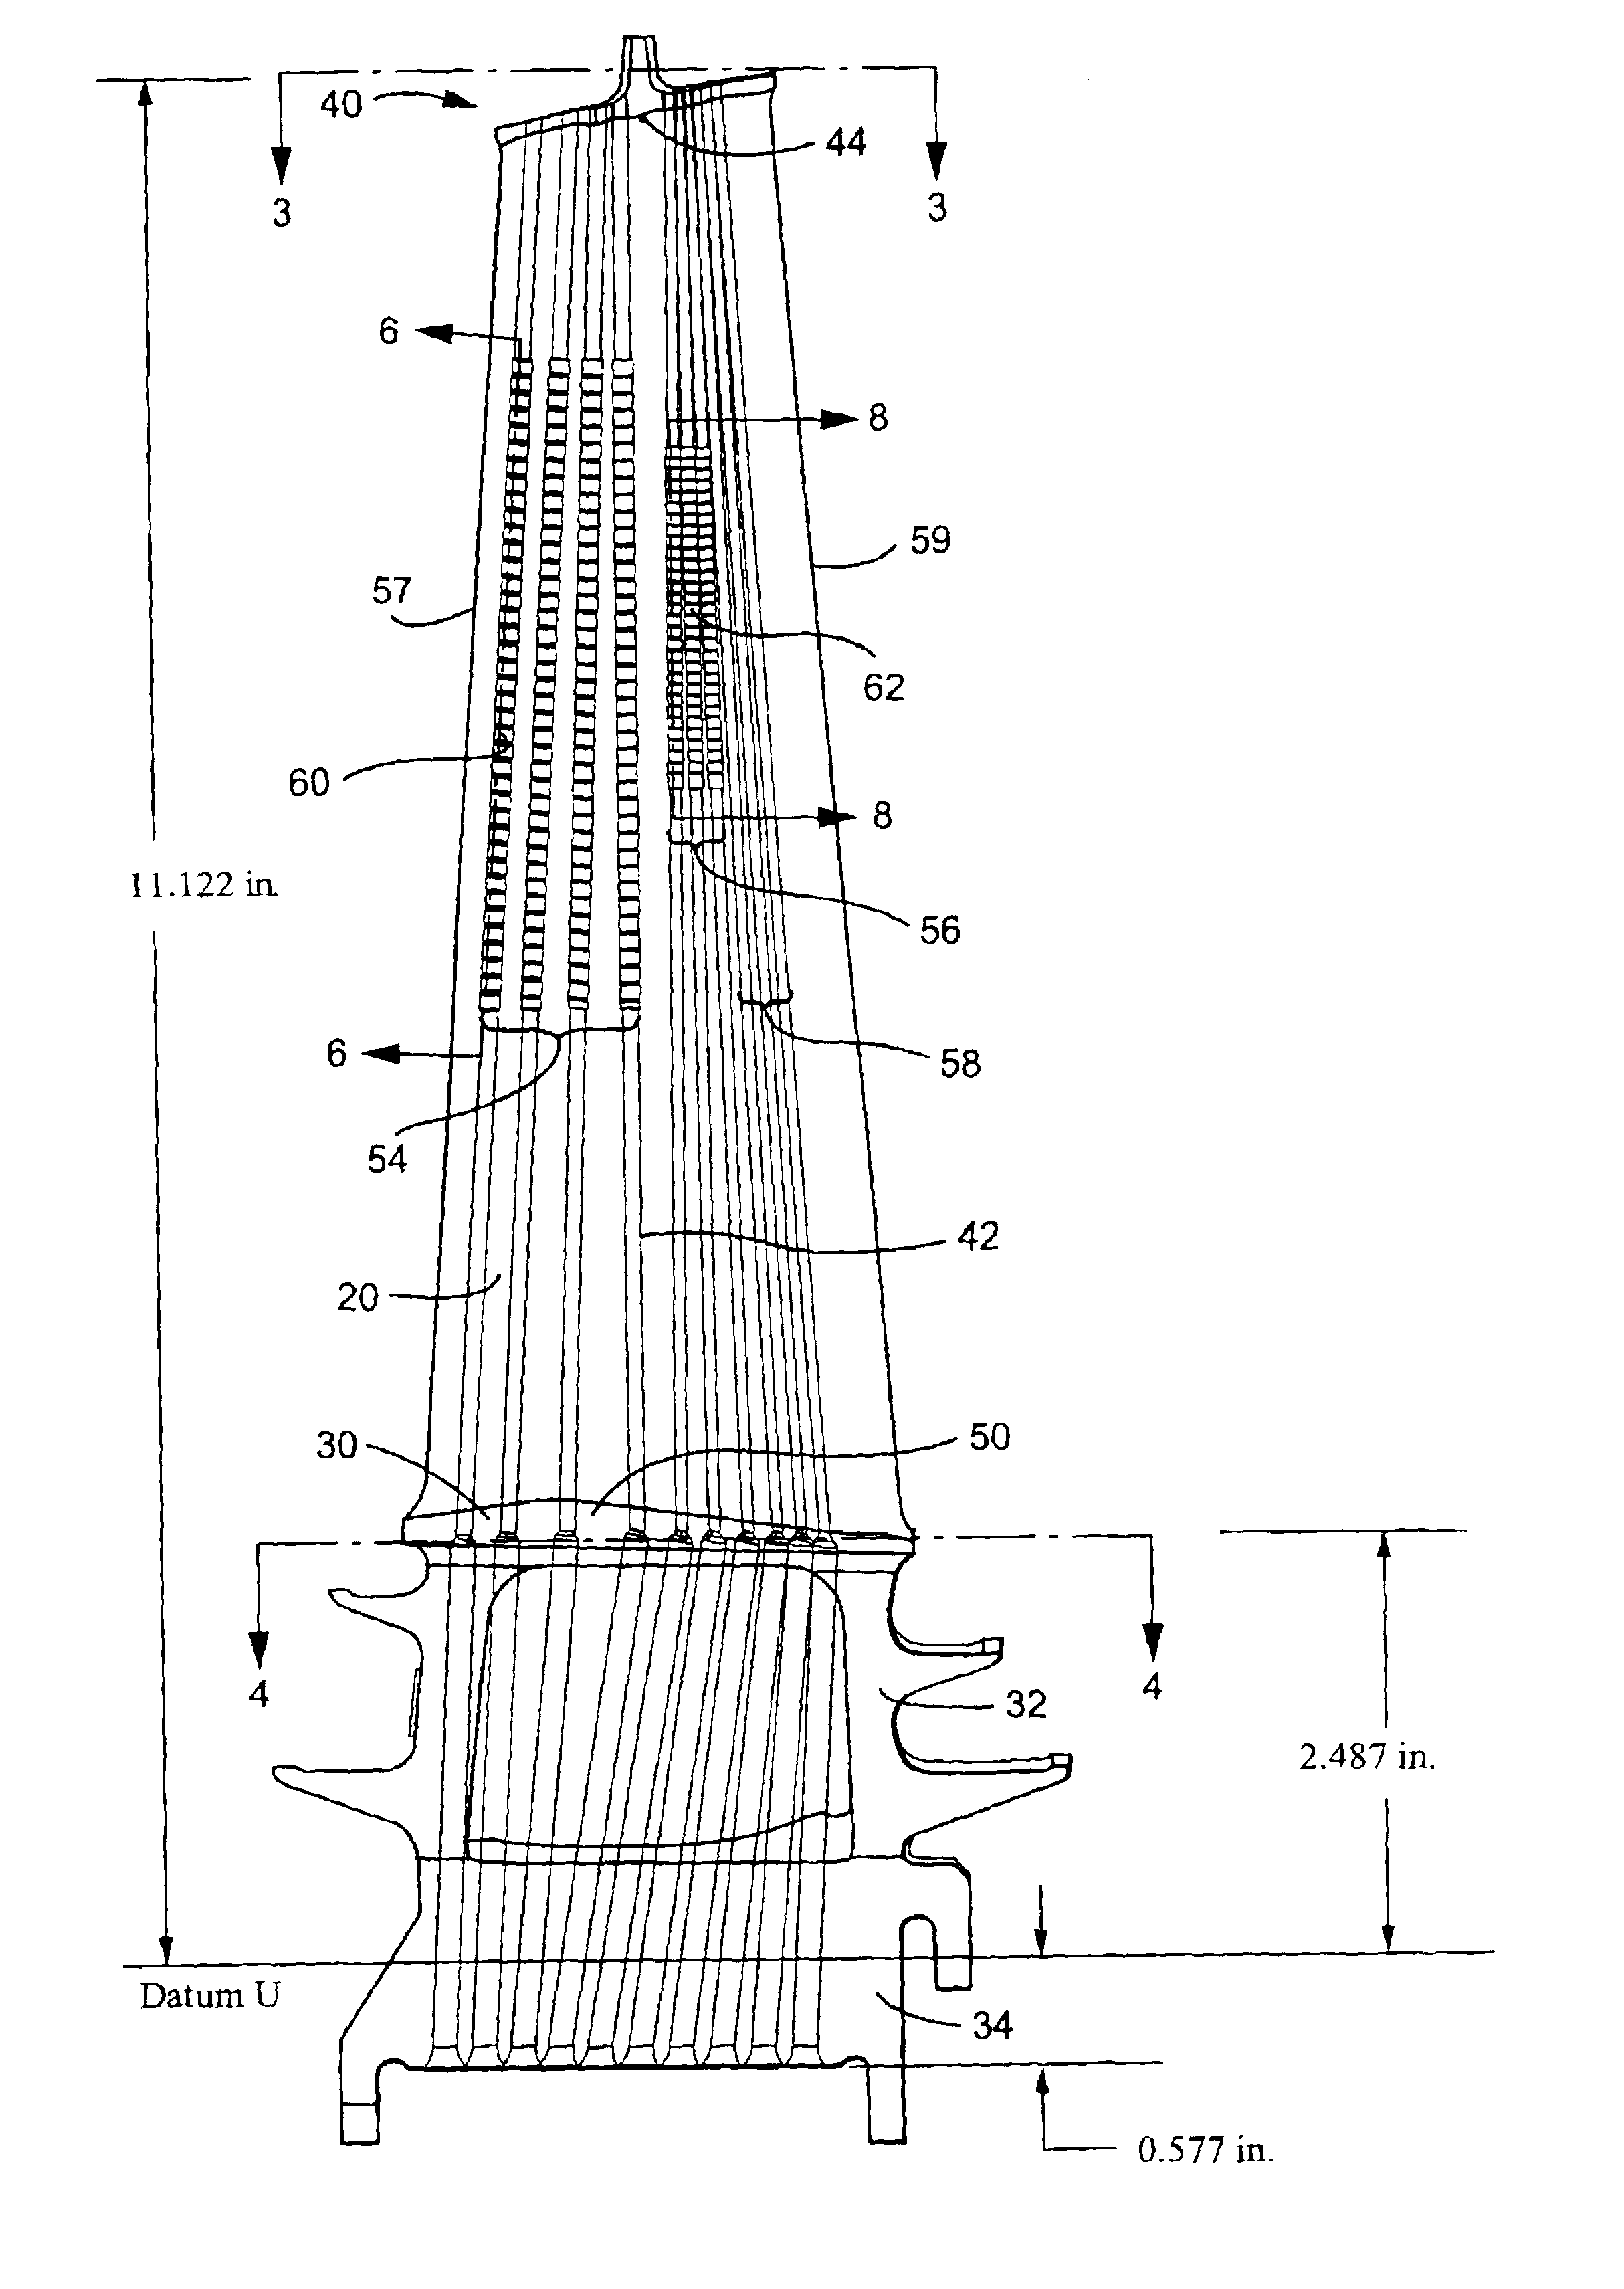 Turbine bucket airfoil cooling hole location, style and configuration